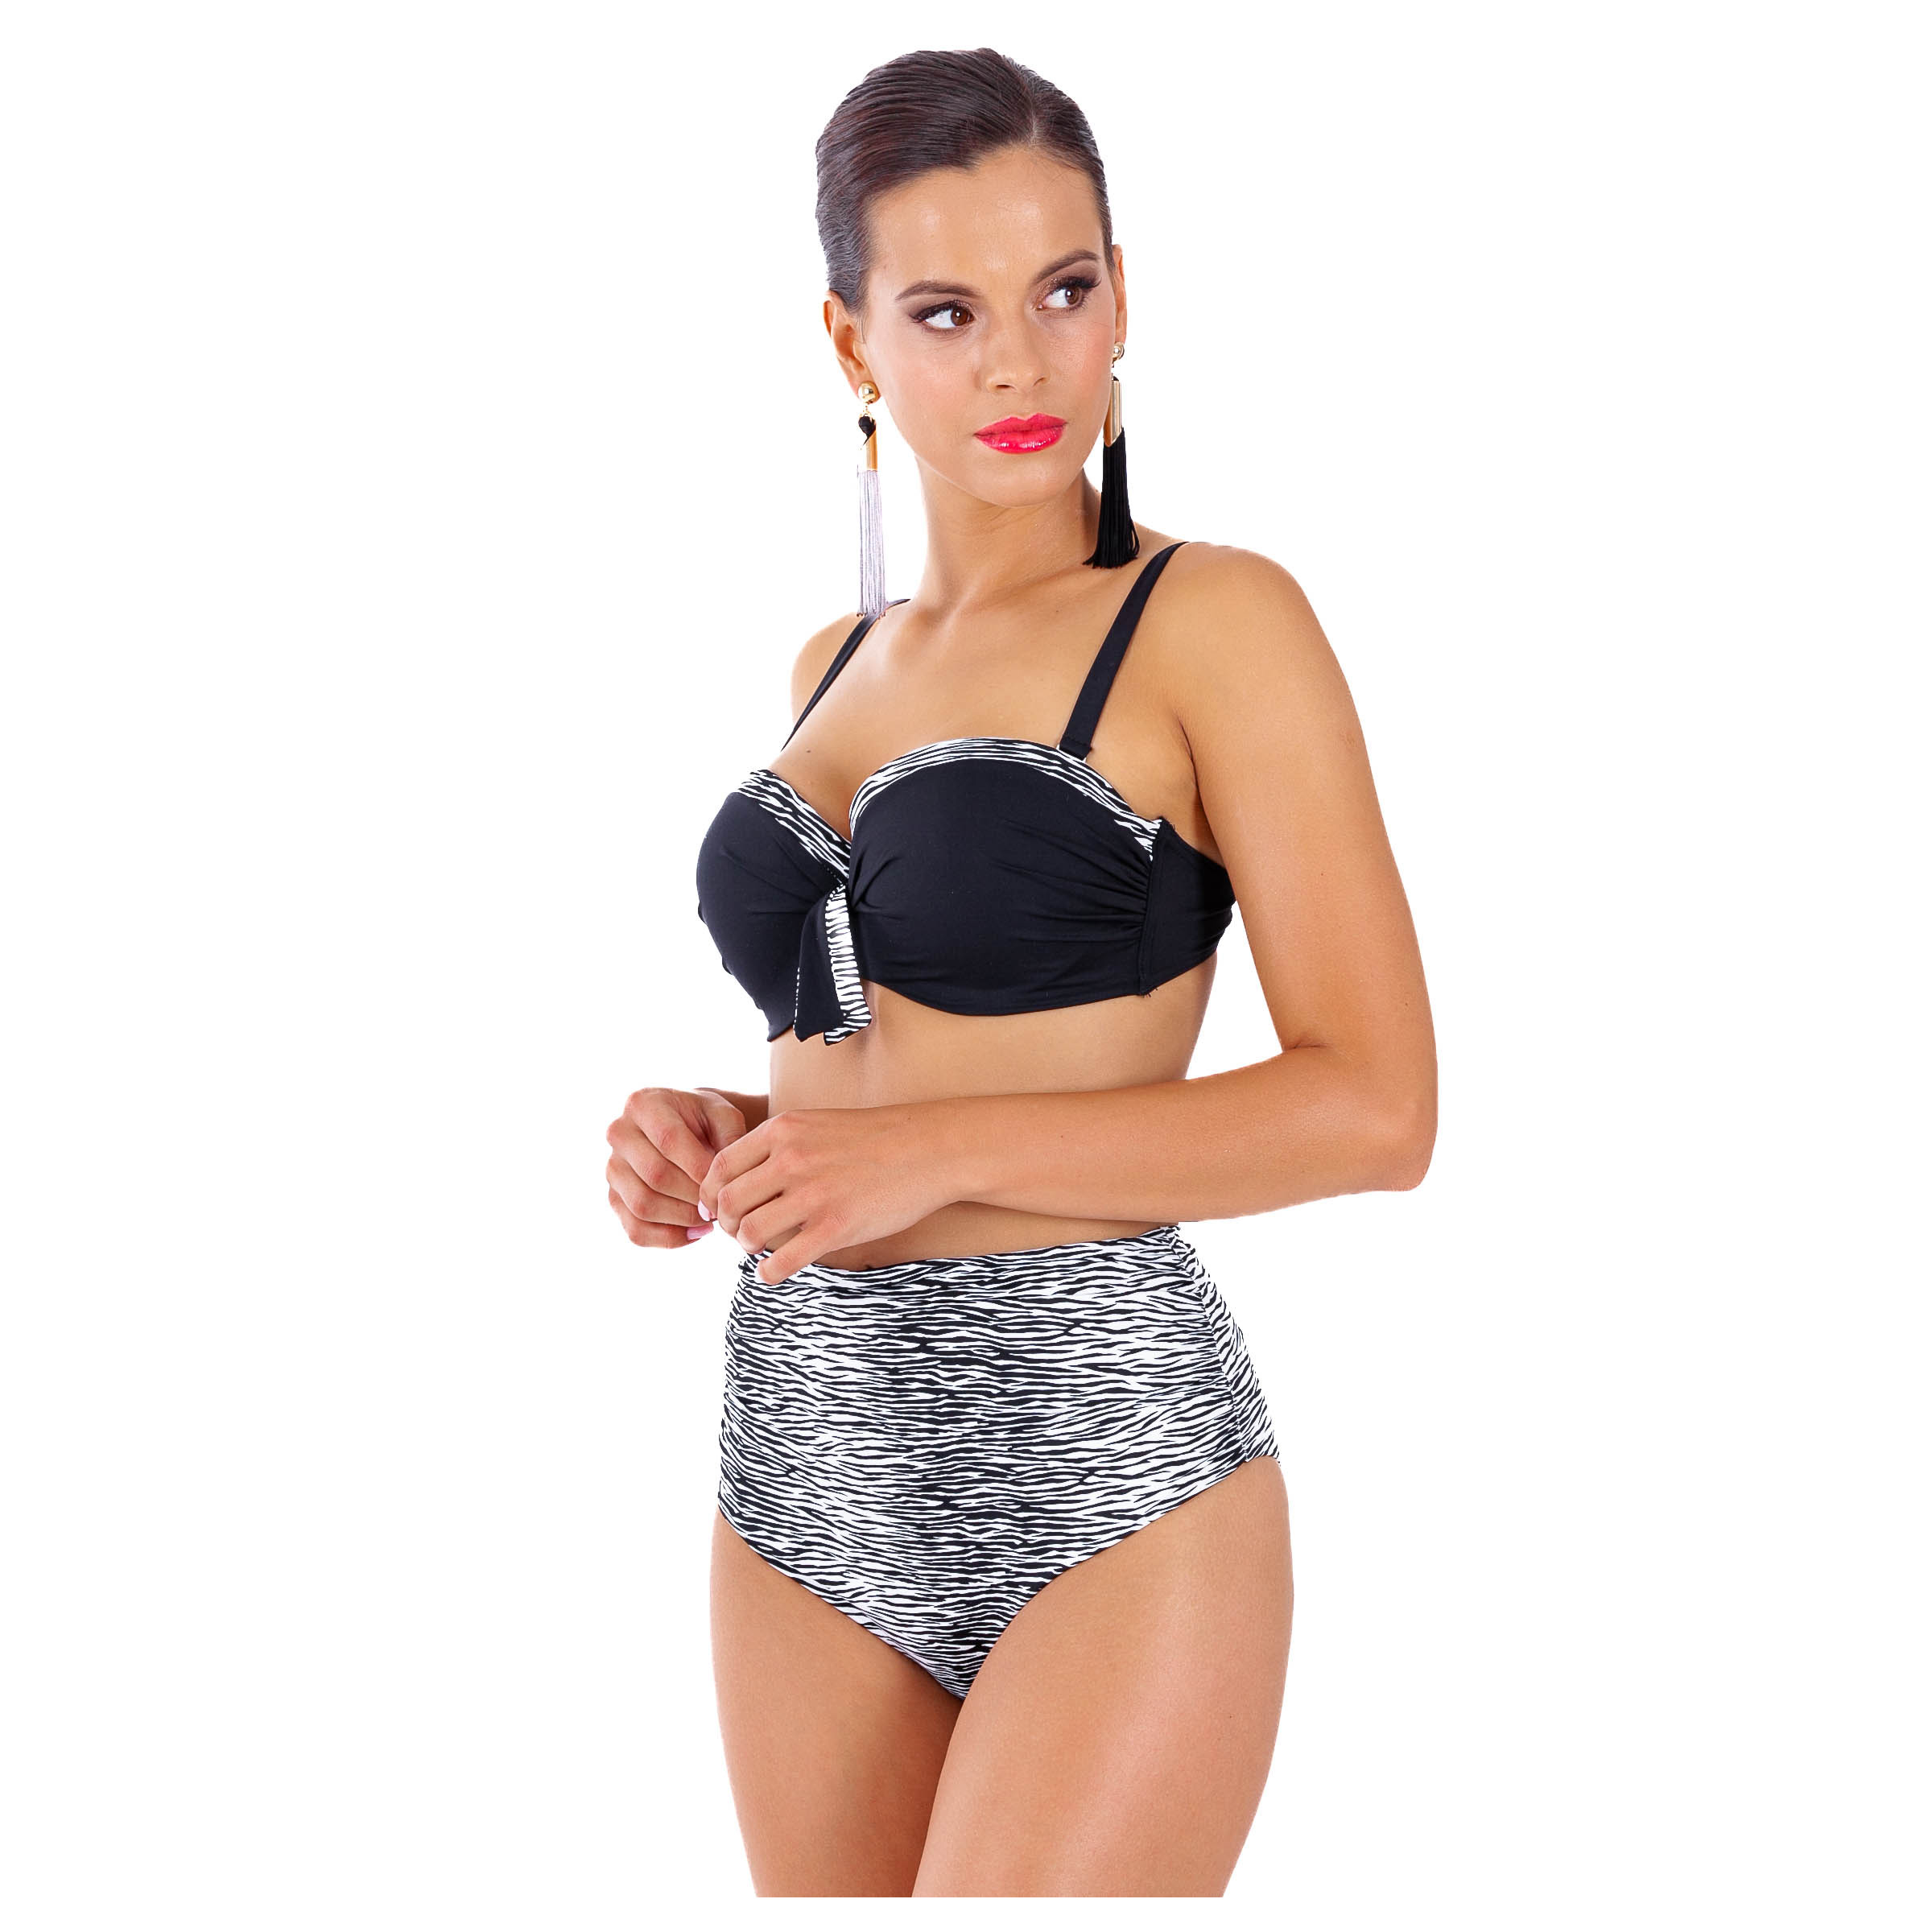 Abi / F6 - two-piece push-up swimsuit with a high waist in an animal pattern